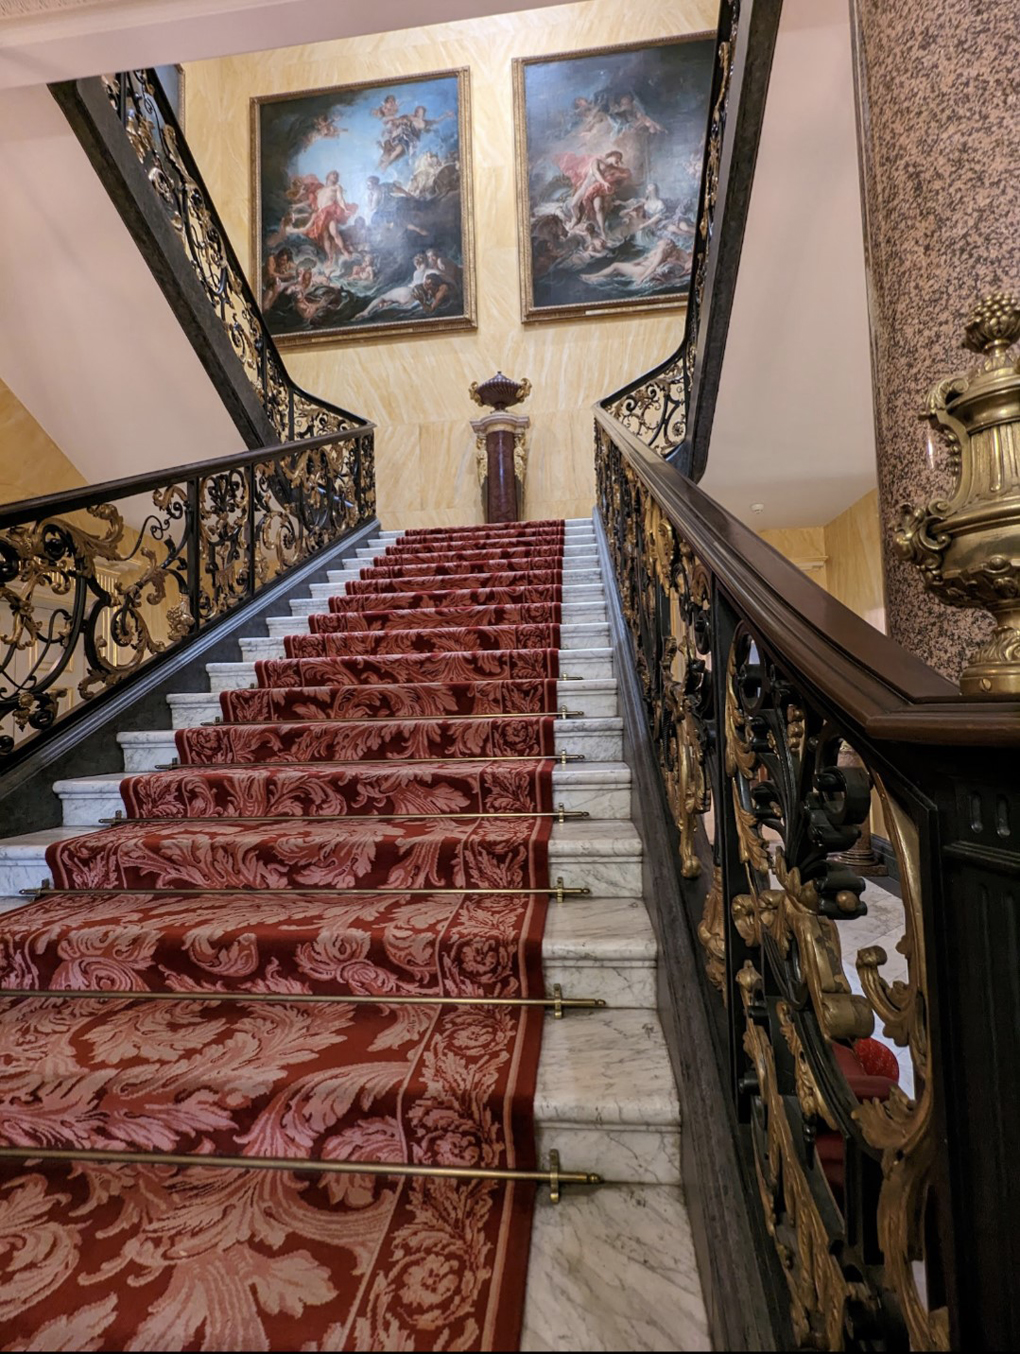 Stairs at the Wallace Museum, carpeted and ornate with two beautiful paintings.